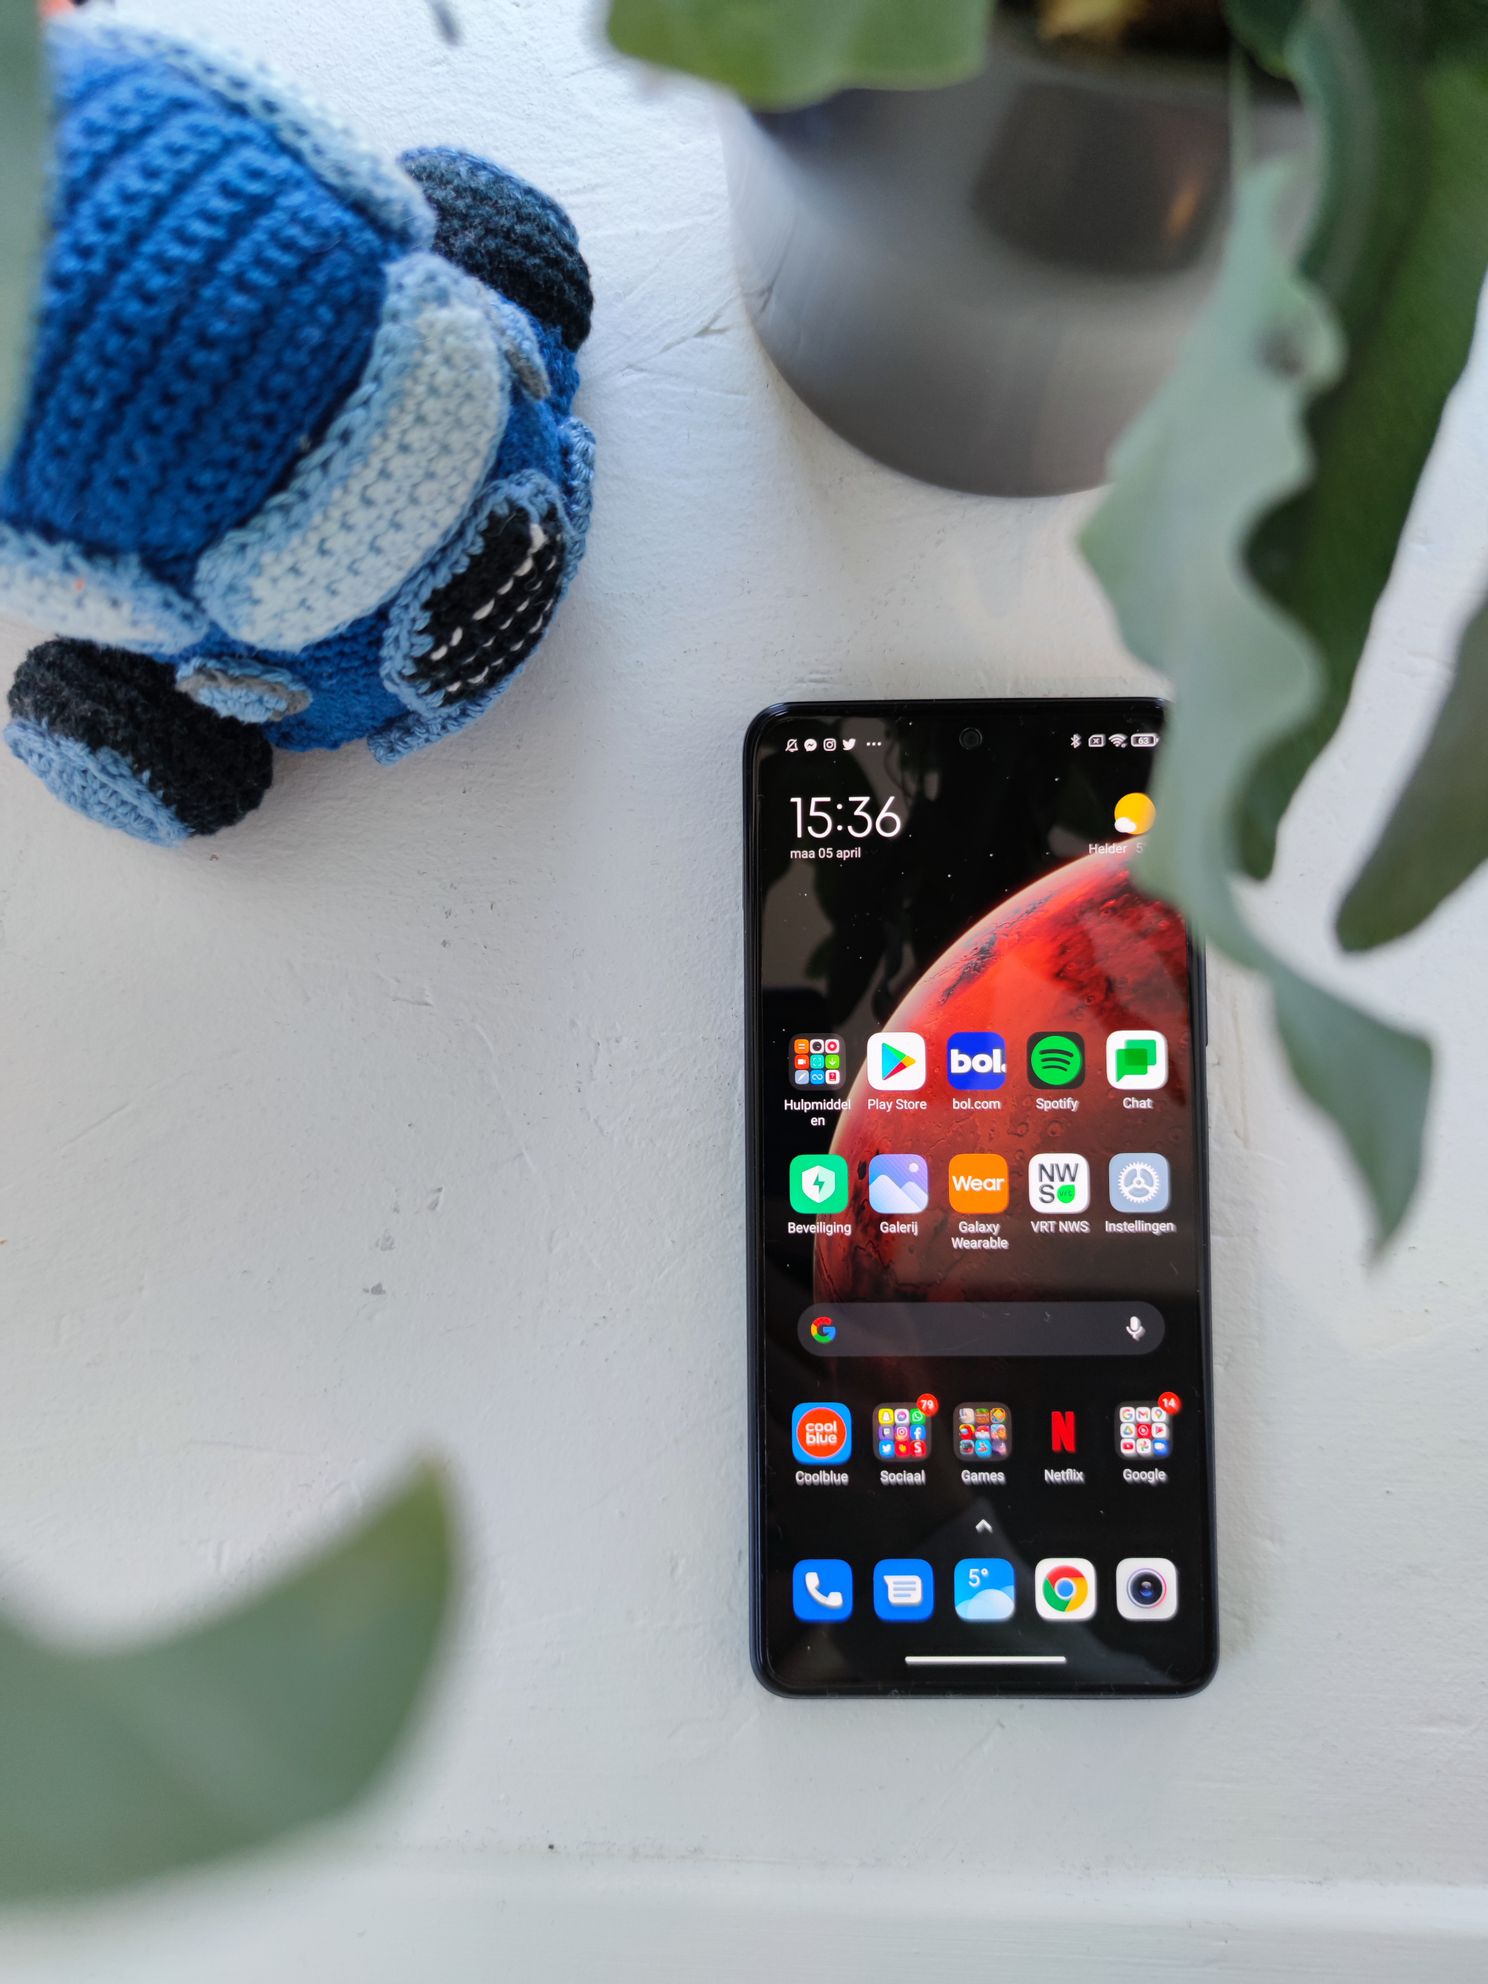 The 10 most read reviews of 2021 on Androidworld